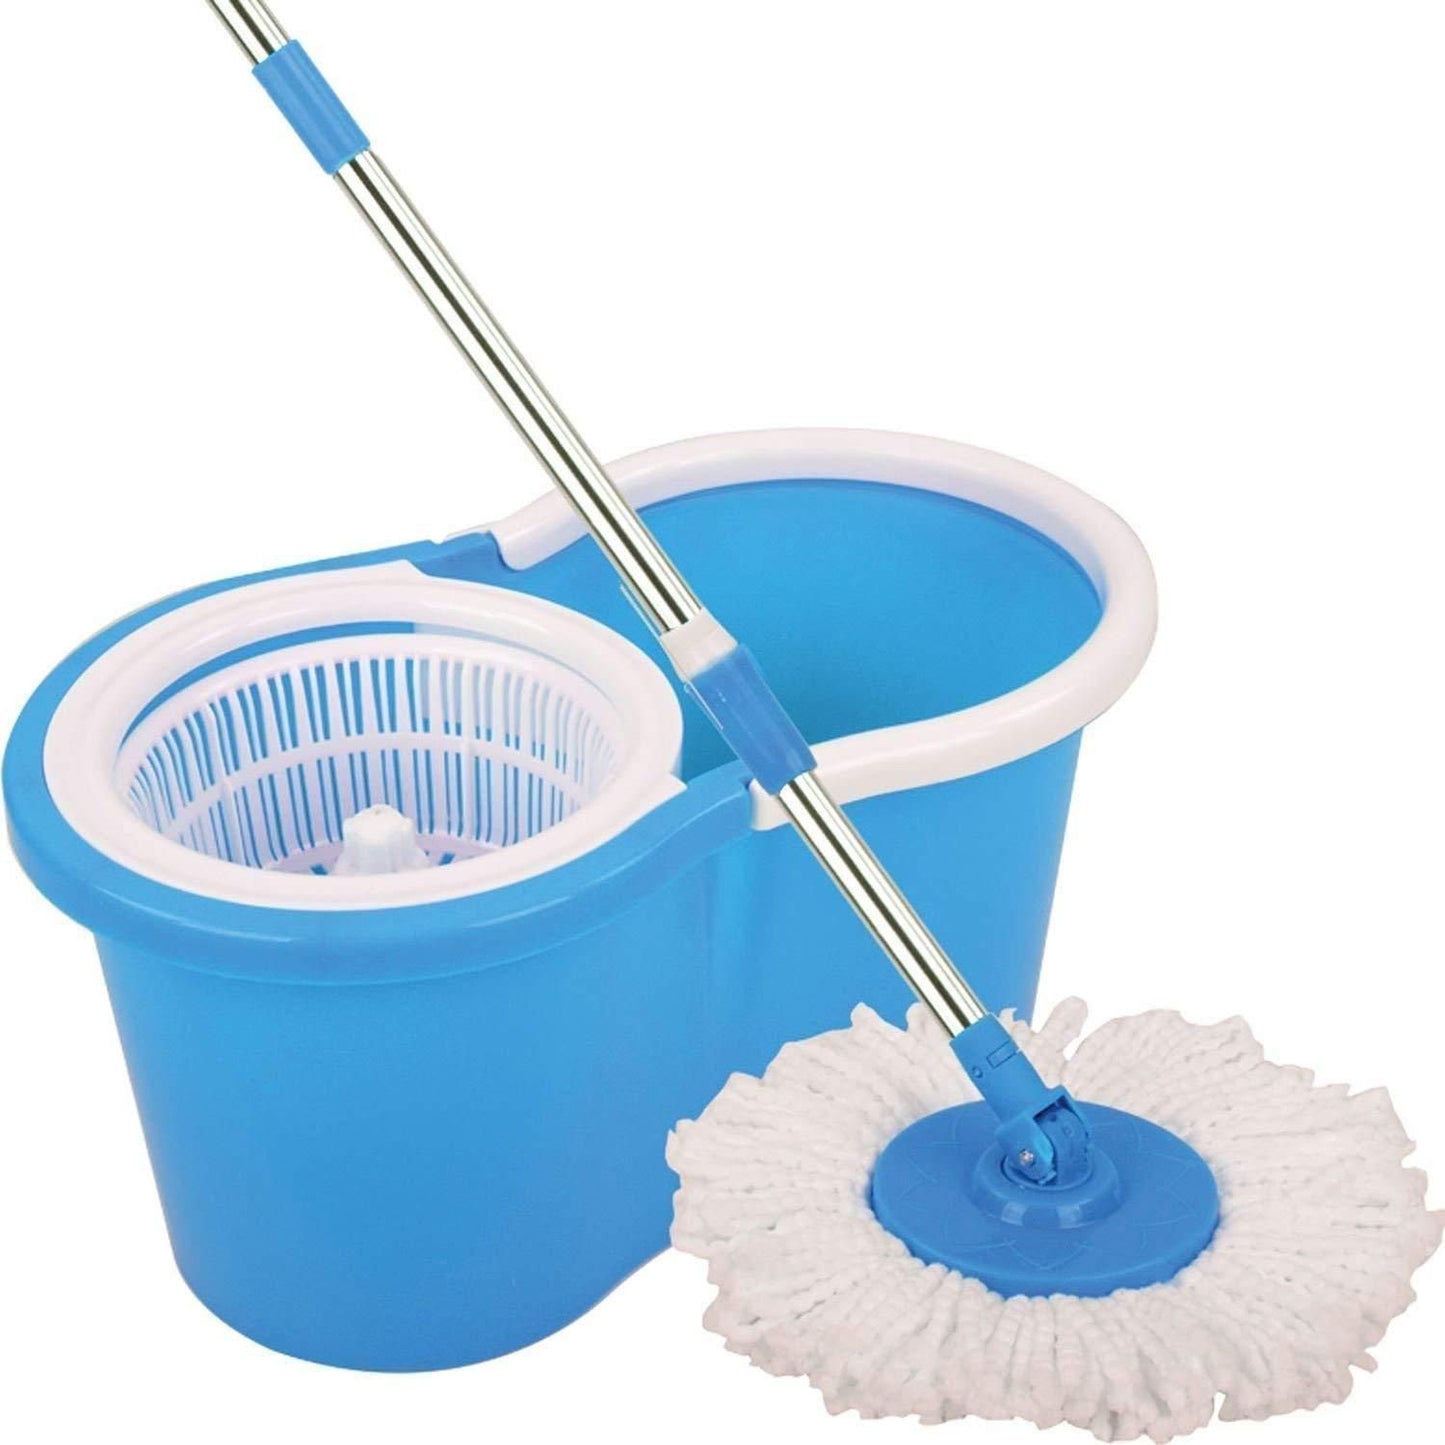 Mop - 360 Degree Spin Bucket Mop With 2 Microfiber Head - Shopaholics